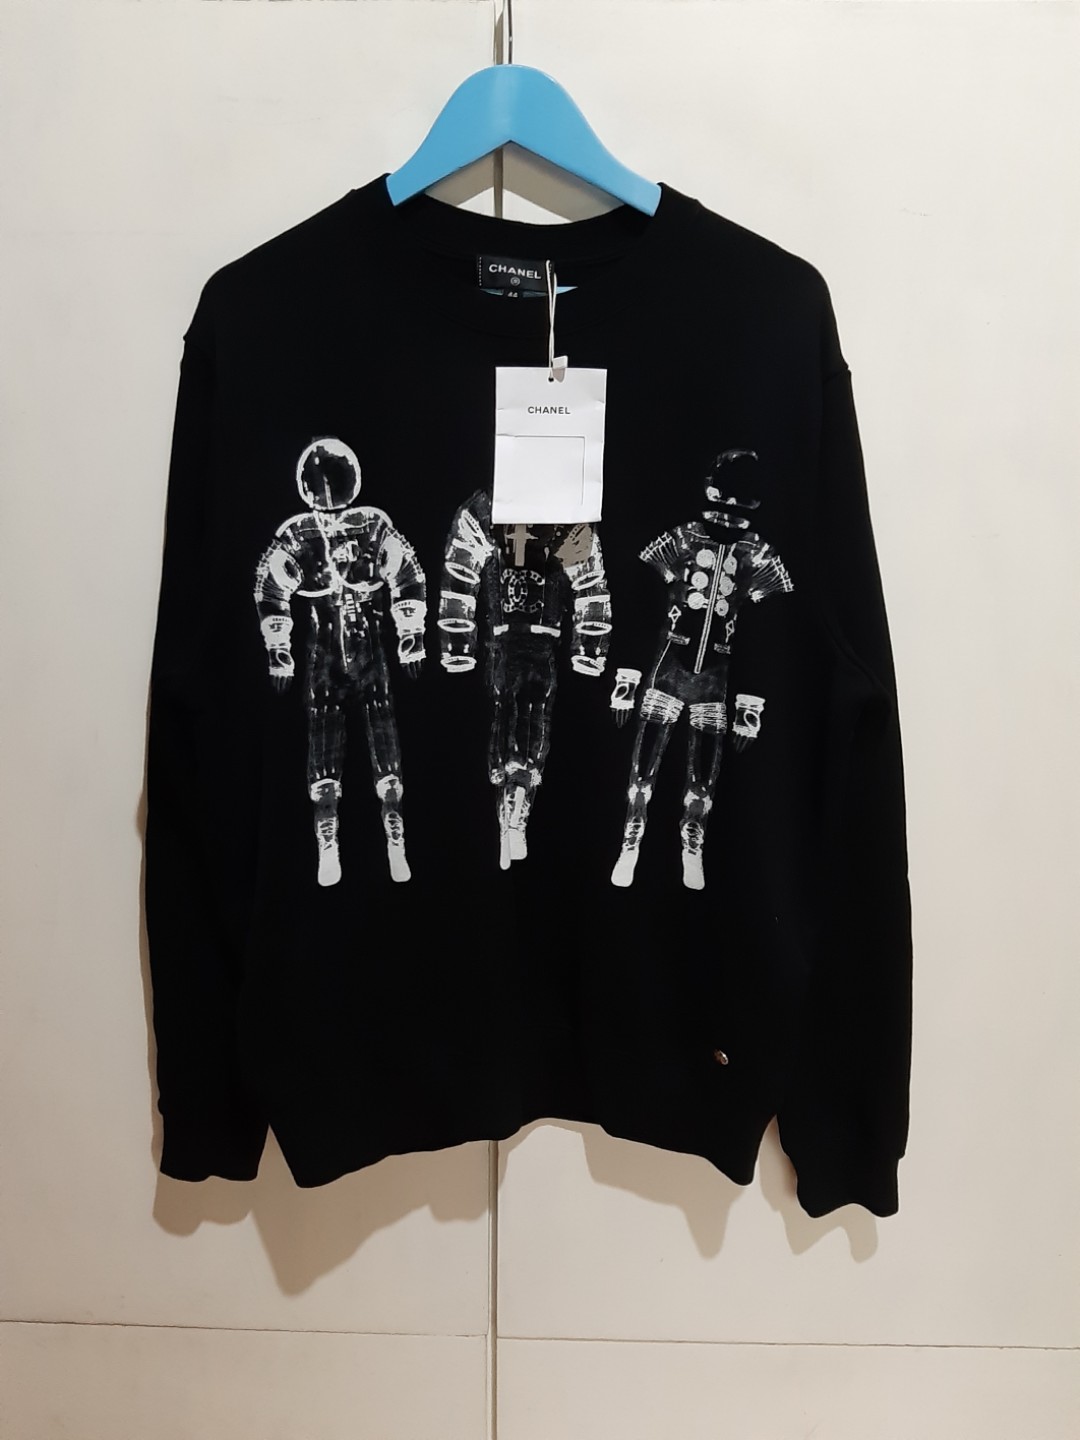 Chanel Astronaut Sweatshirt Men S Fashion Coats Jackets And Outerwear On Carousell